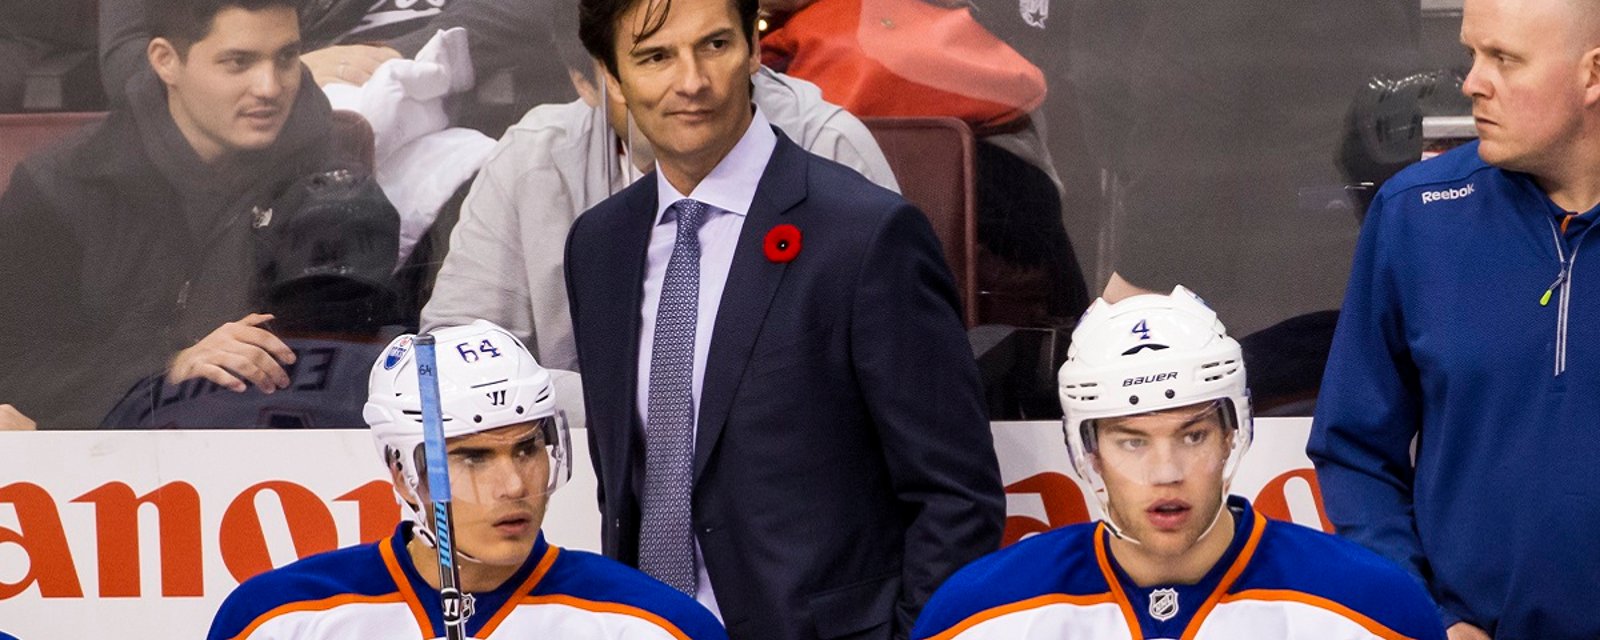 Rumor: Dallas Eakins on the verge of being hired as an NHL head coach.